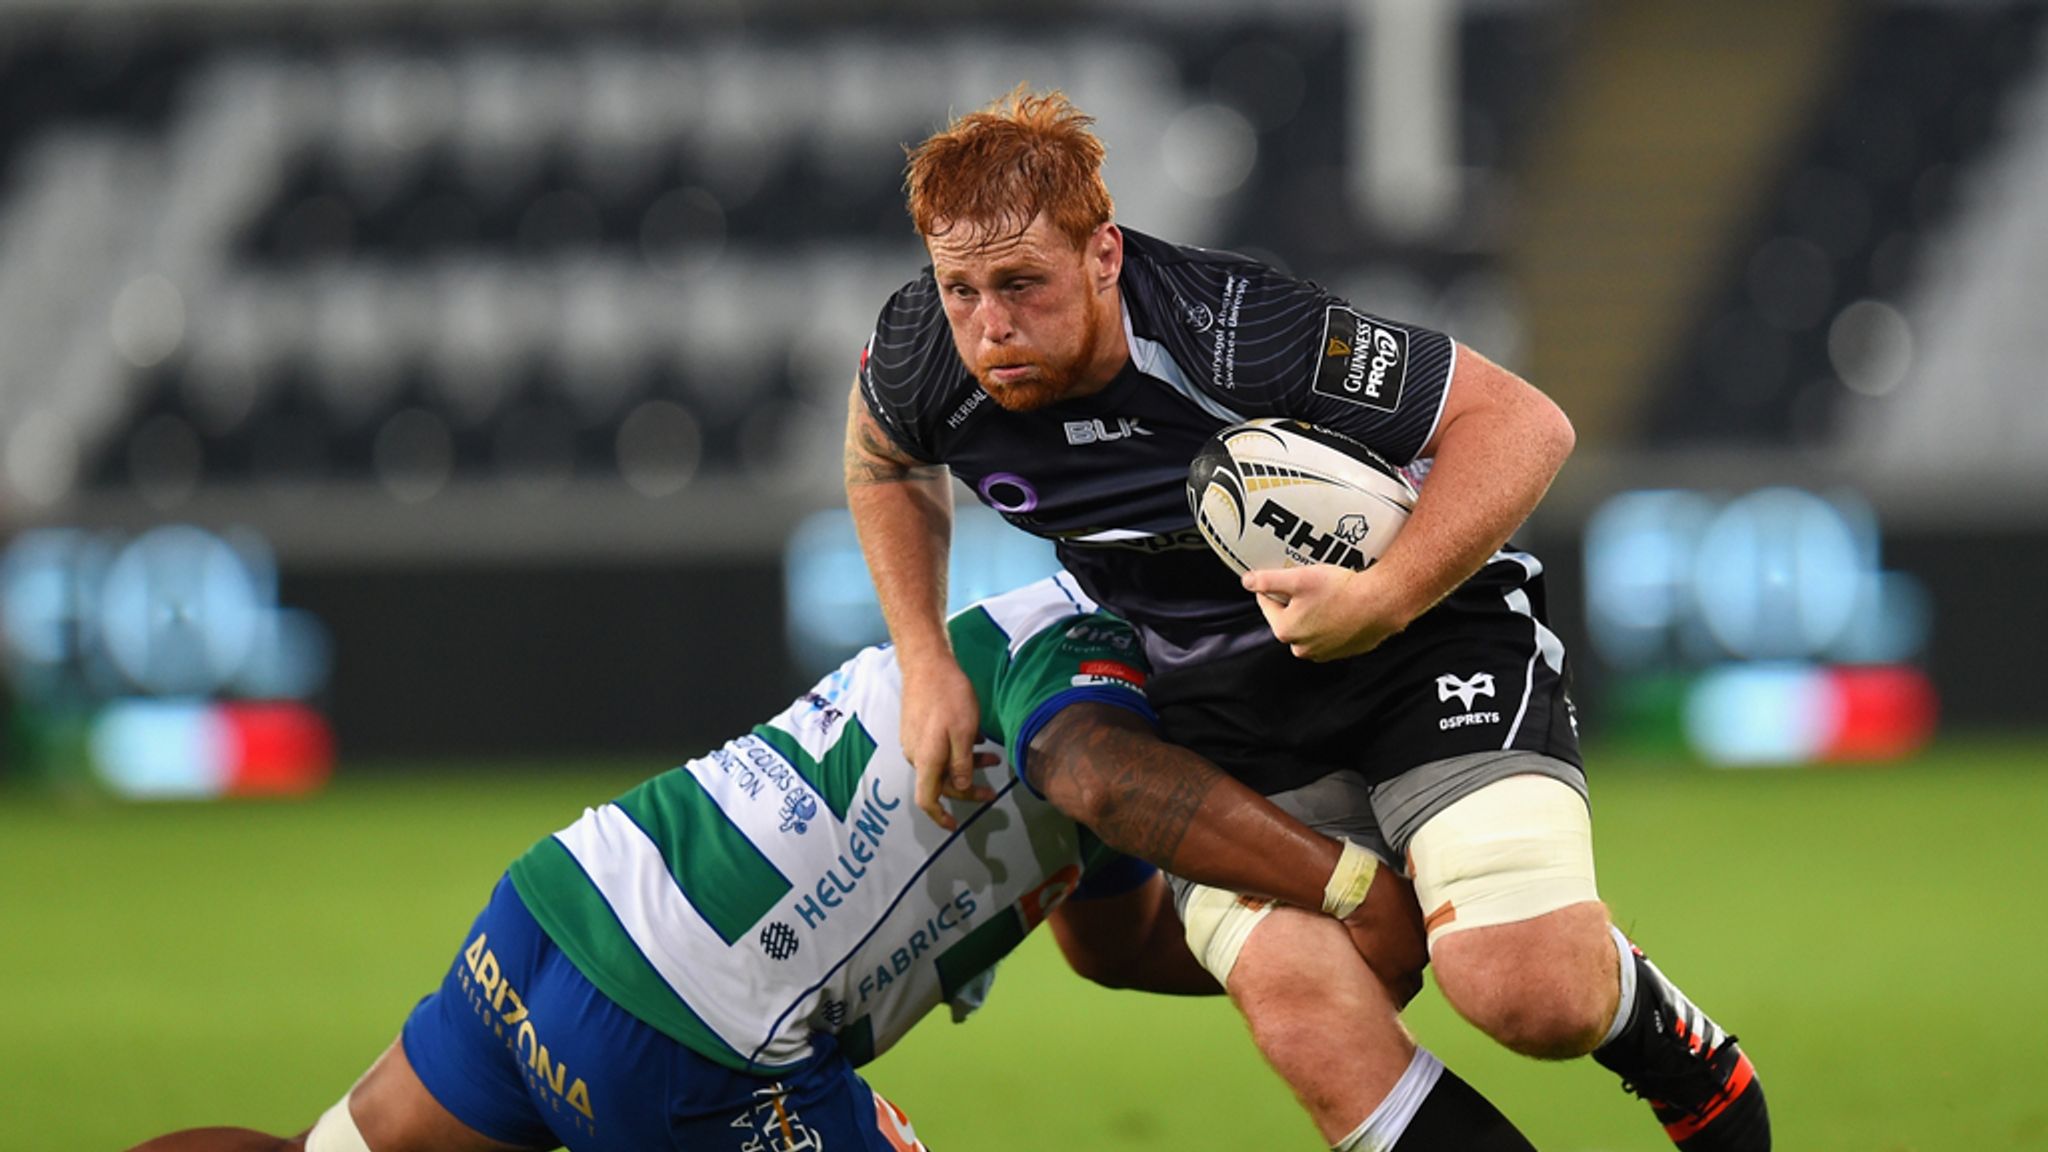 Ospreys lose prop Aaron Jarvis and flanker Dan Baker to injury Rugby Union News Sky Sports